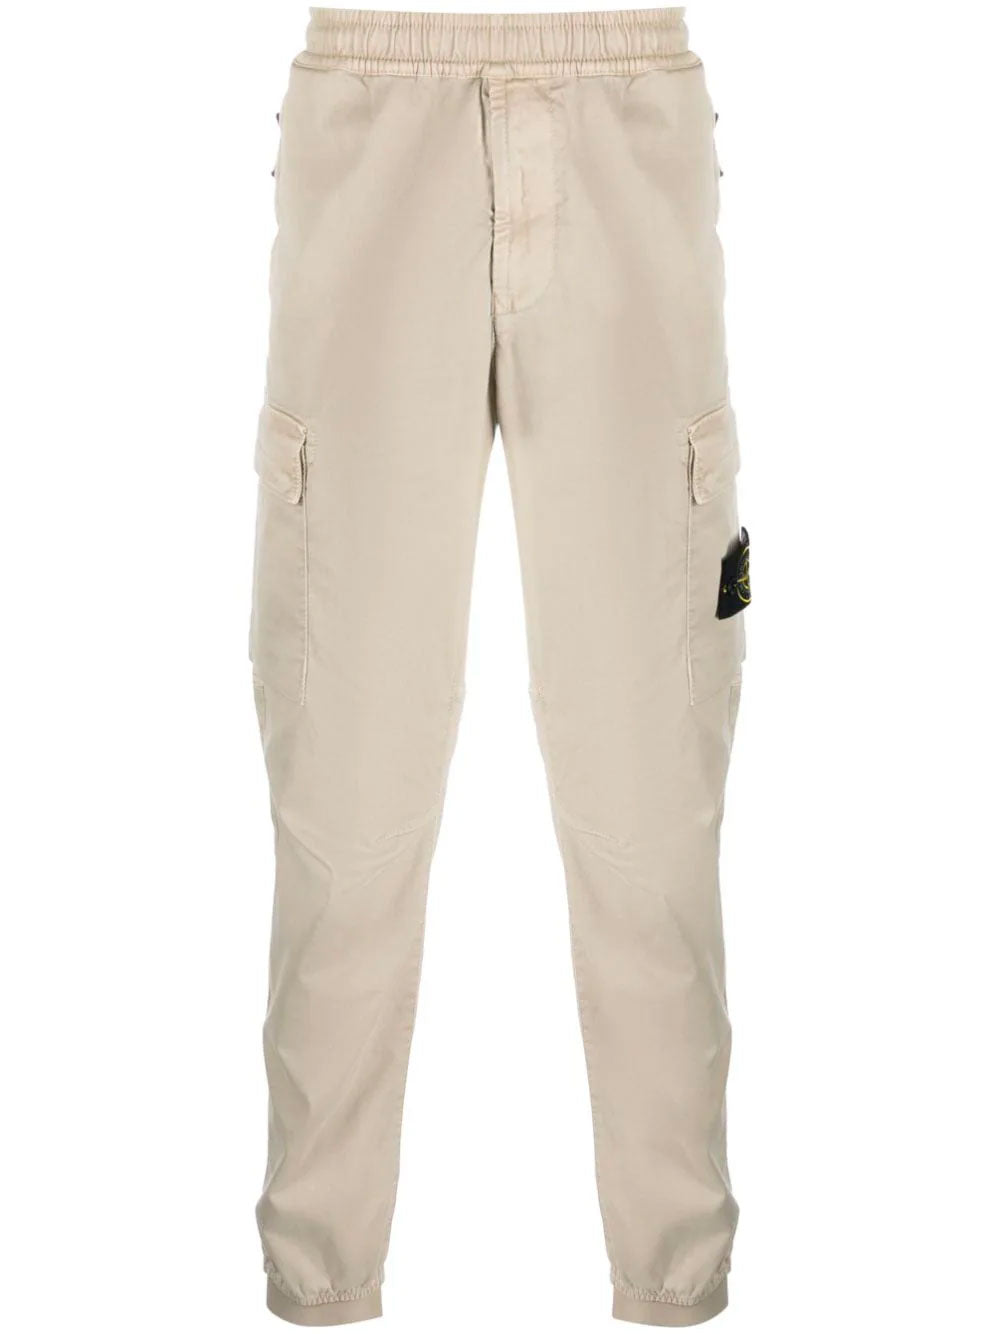 Compass-badge cargo trousers